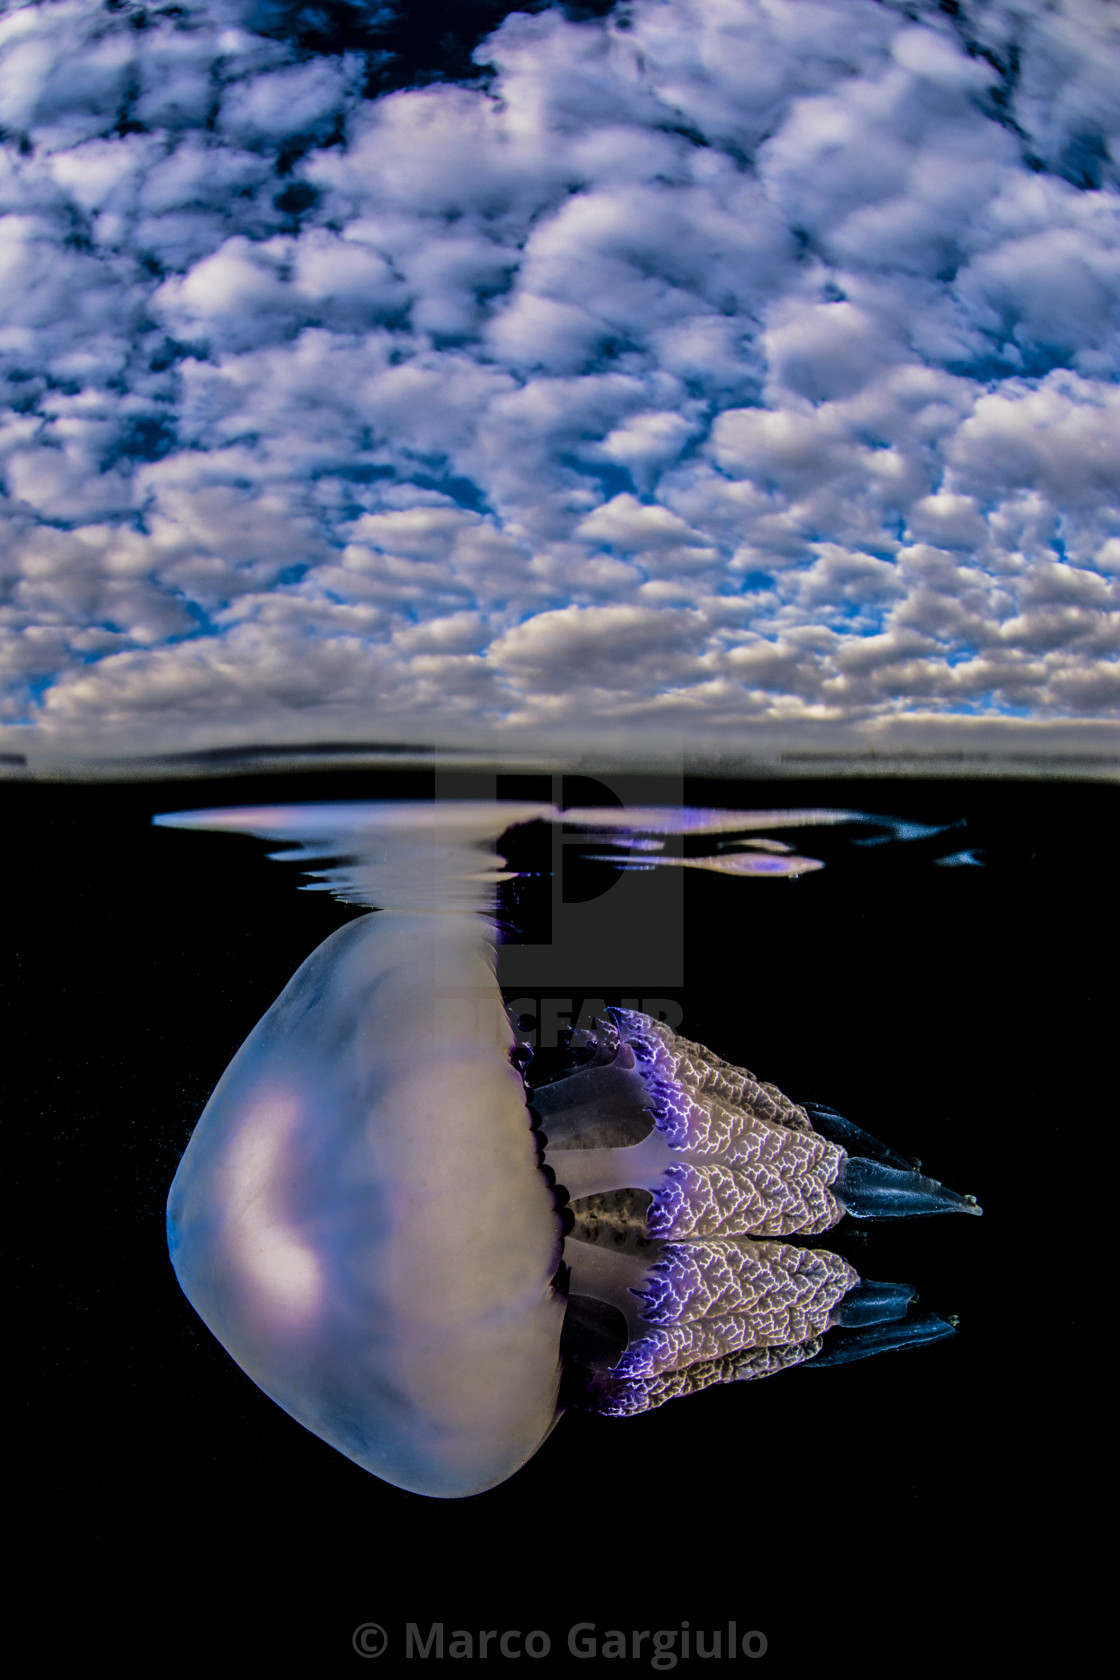 "Jellyfish & clouds" stock image